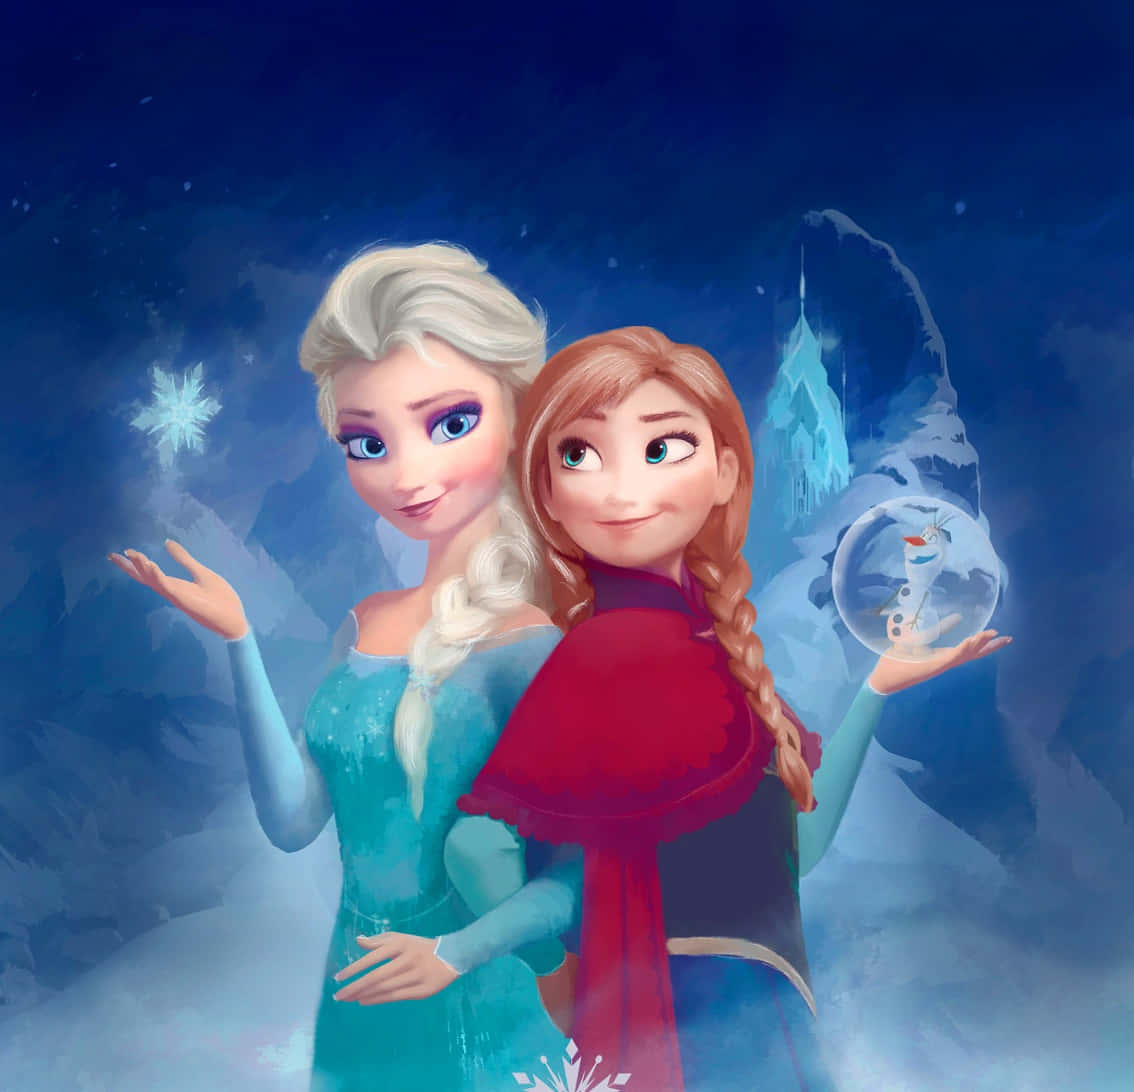 Sisters Forever - Elsa and Anna from Frozen